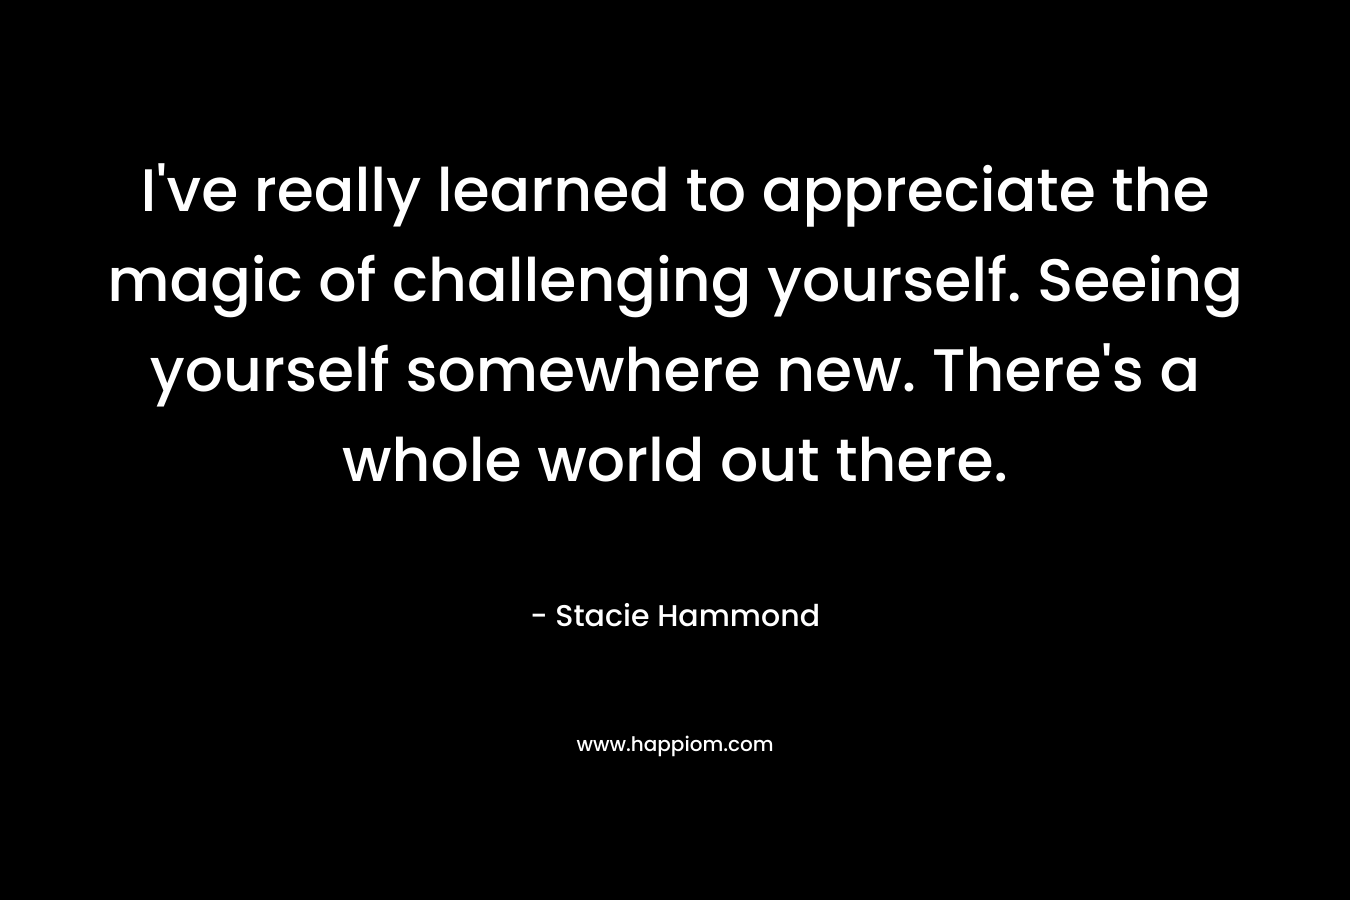 I’ve really learned to appreciate the magic of challenging yourself. Seeing yourself somewhere new. There’s a whole world out there. – Stacie Hammond